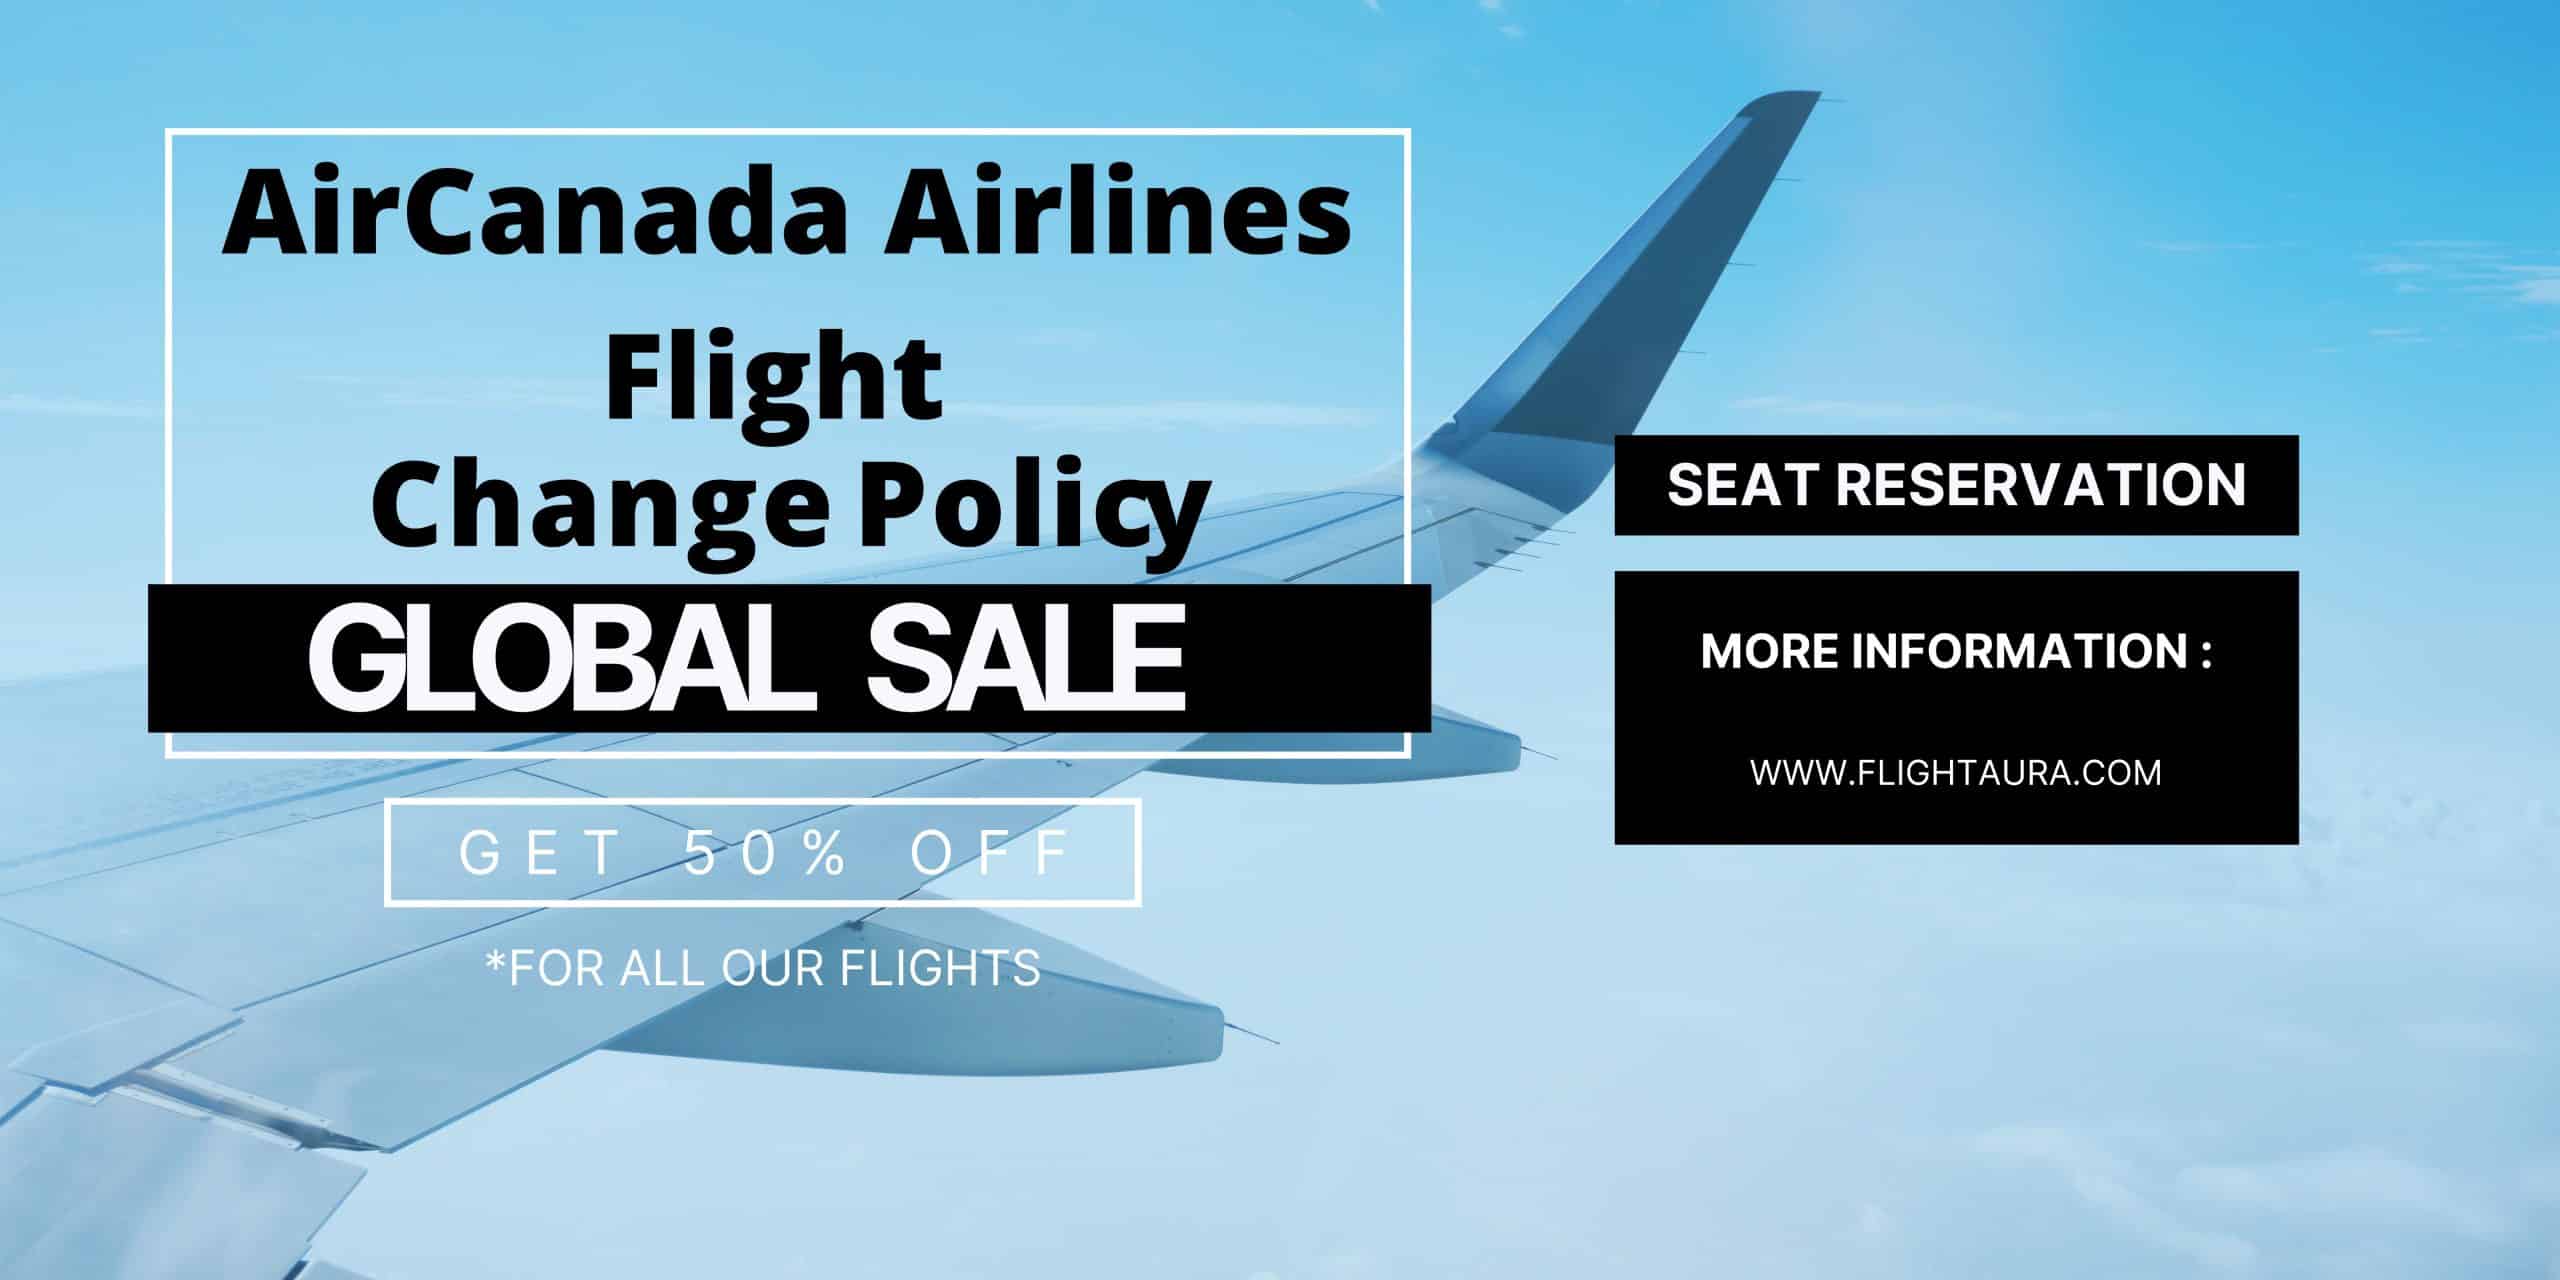 AirCanada Airlines Flight Change Policy